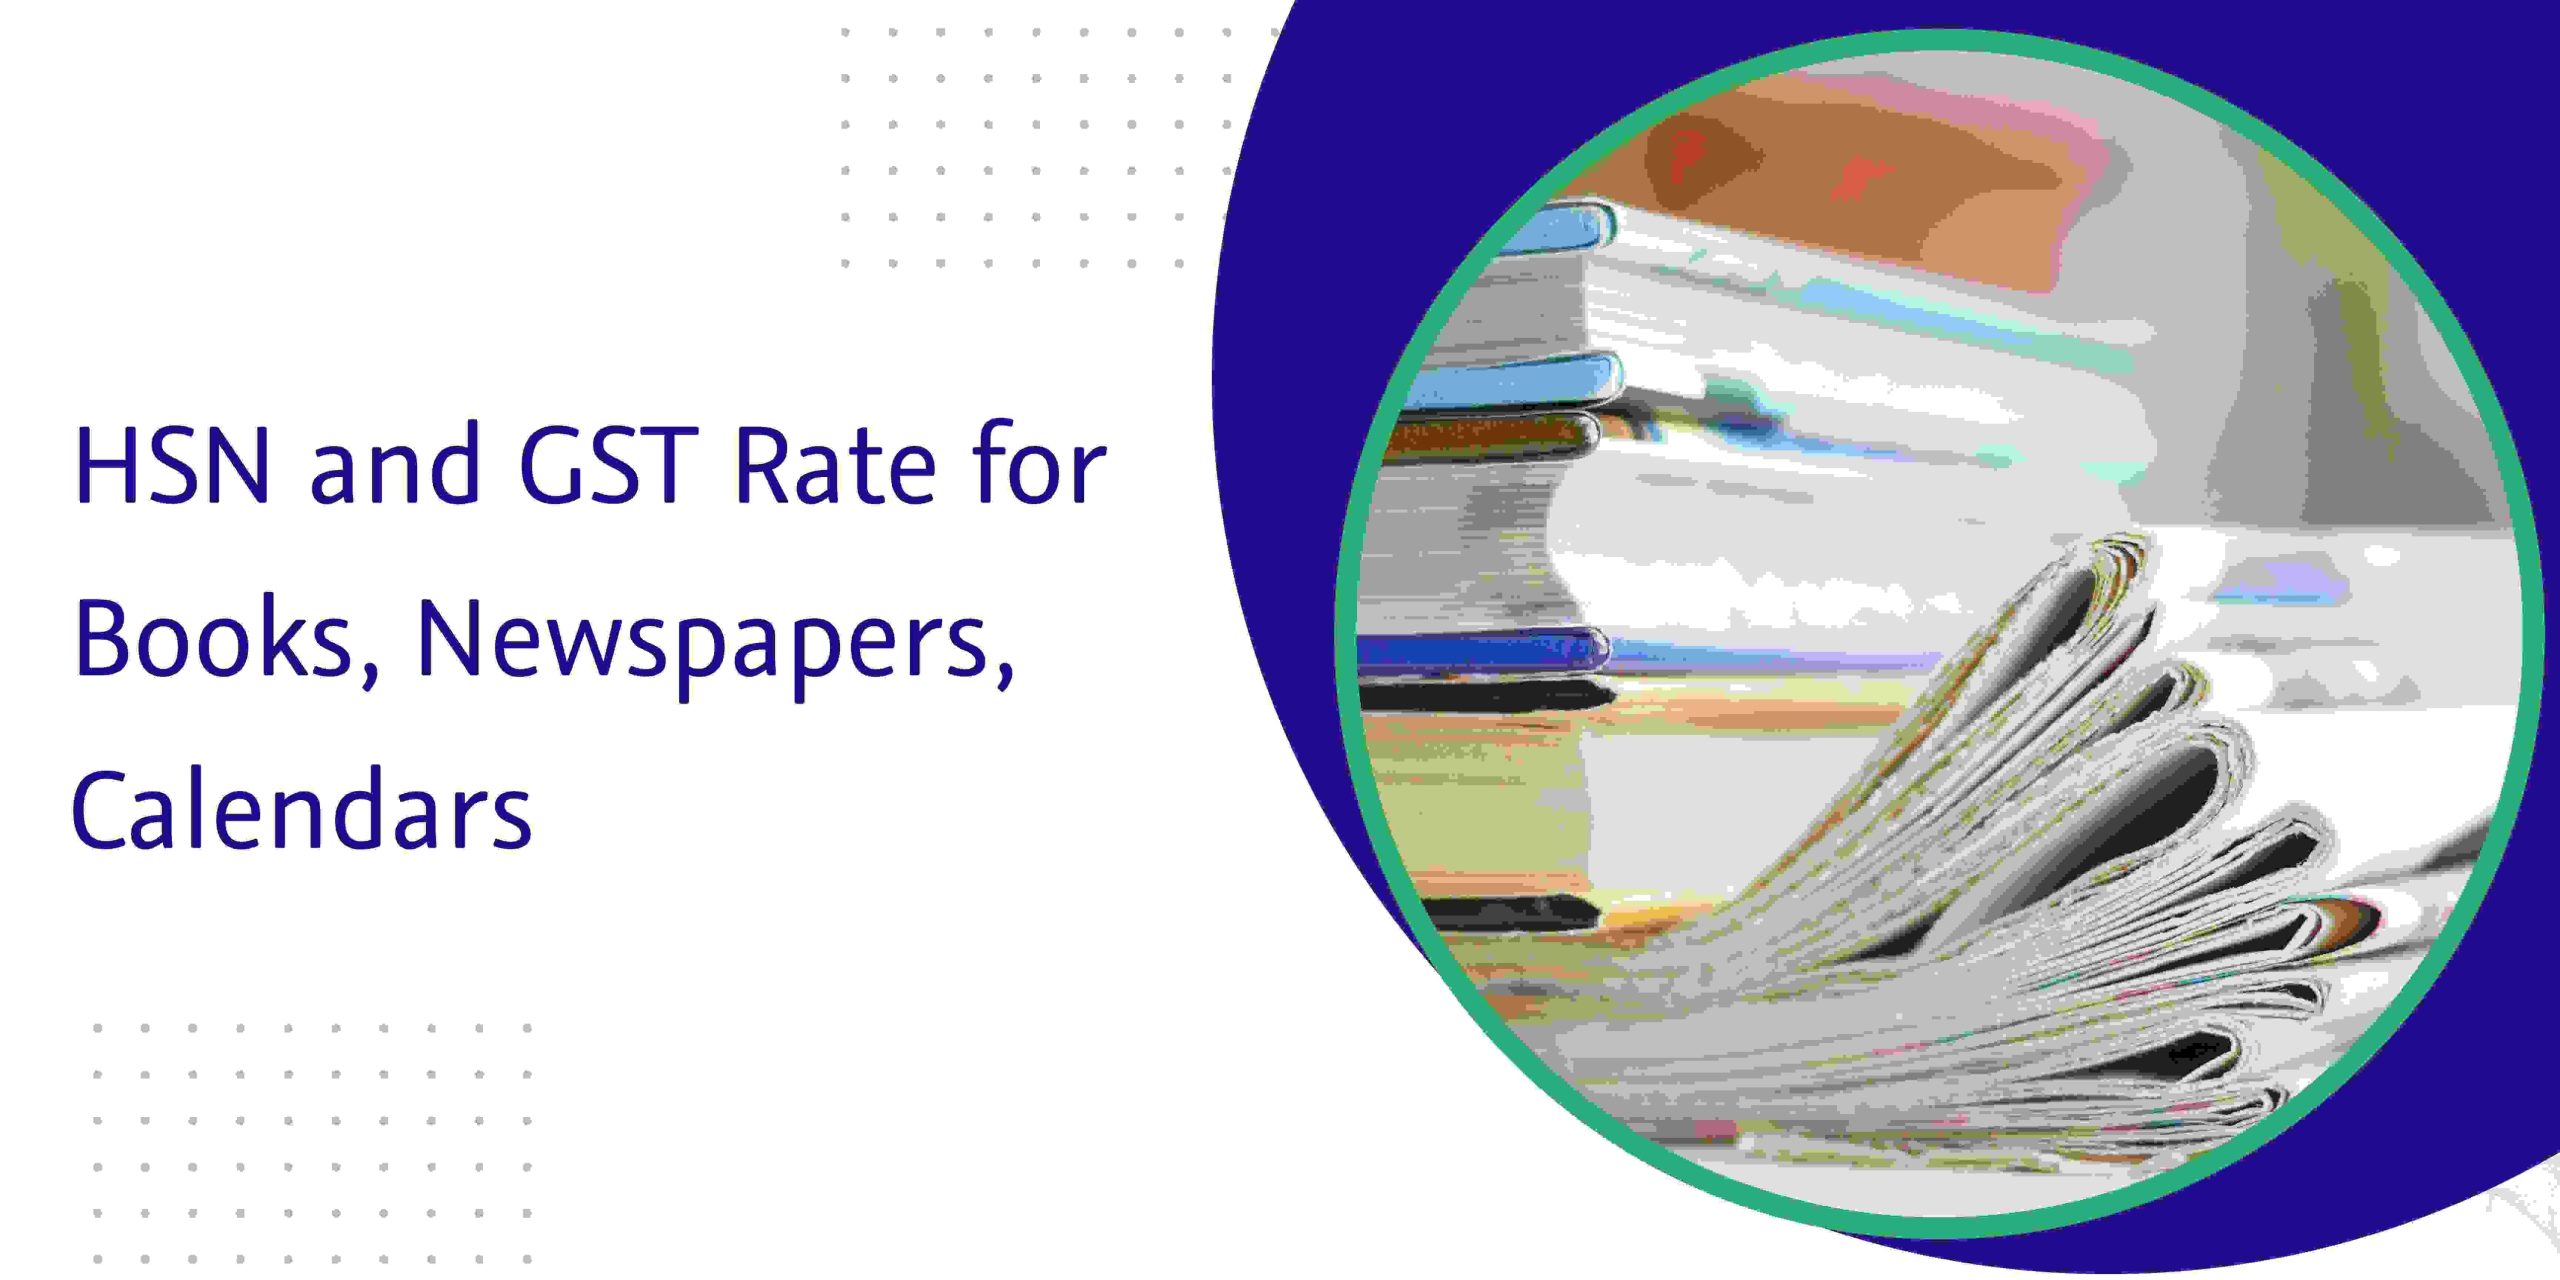 CaptainBiz: HSN and GST Rate for Books, Newspapers, Calendars